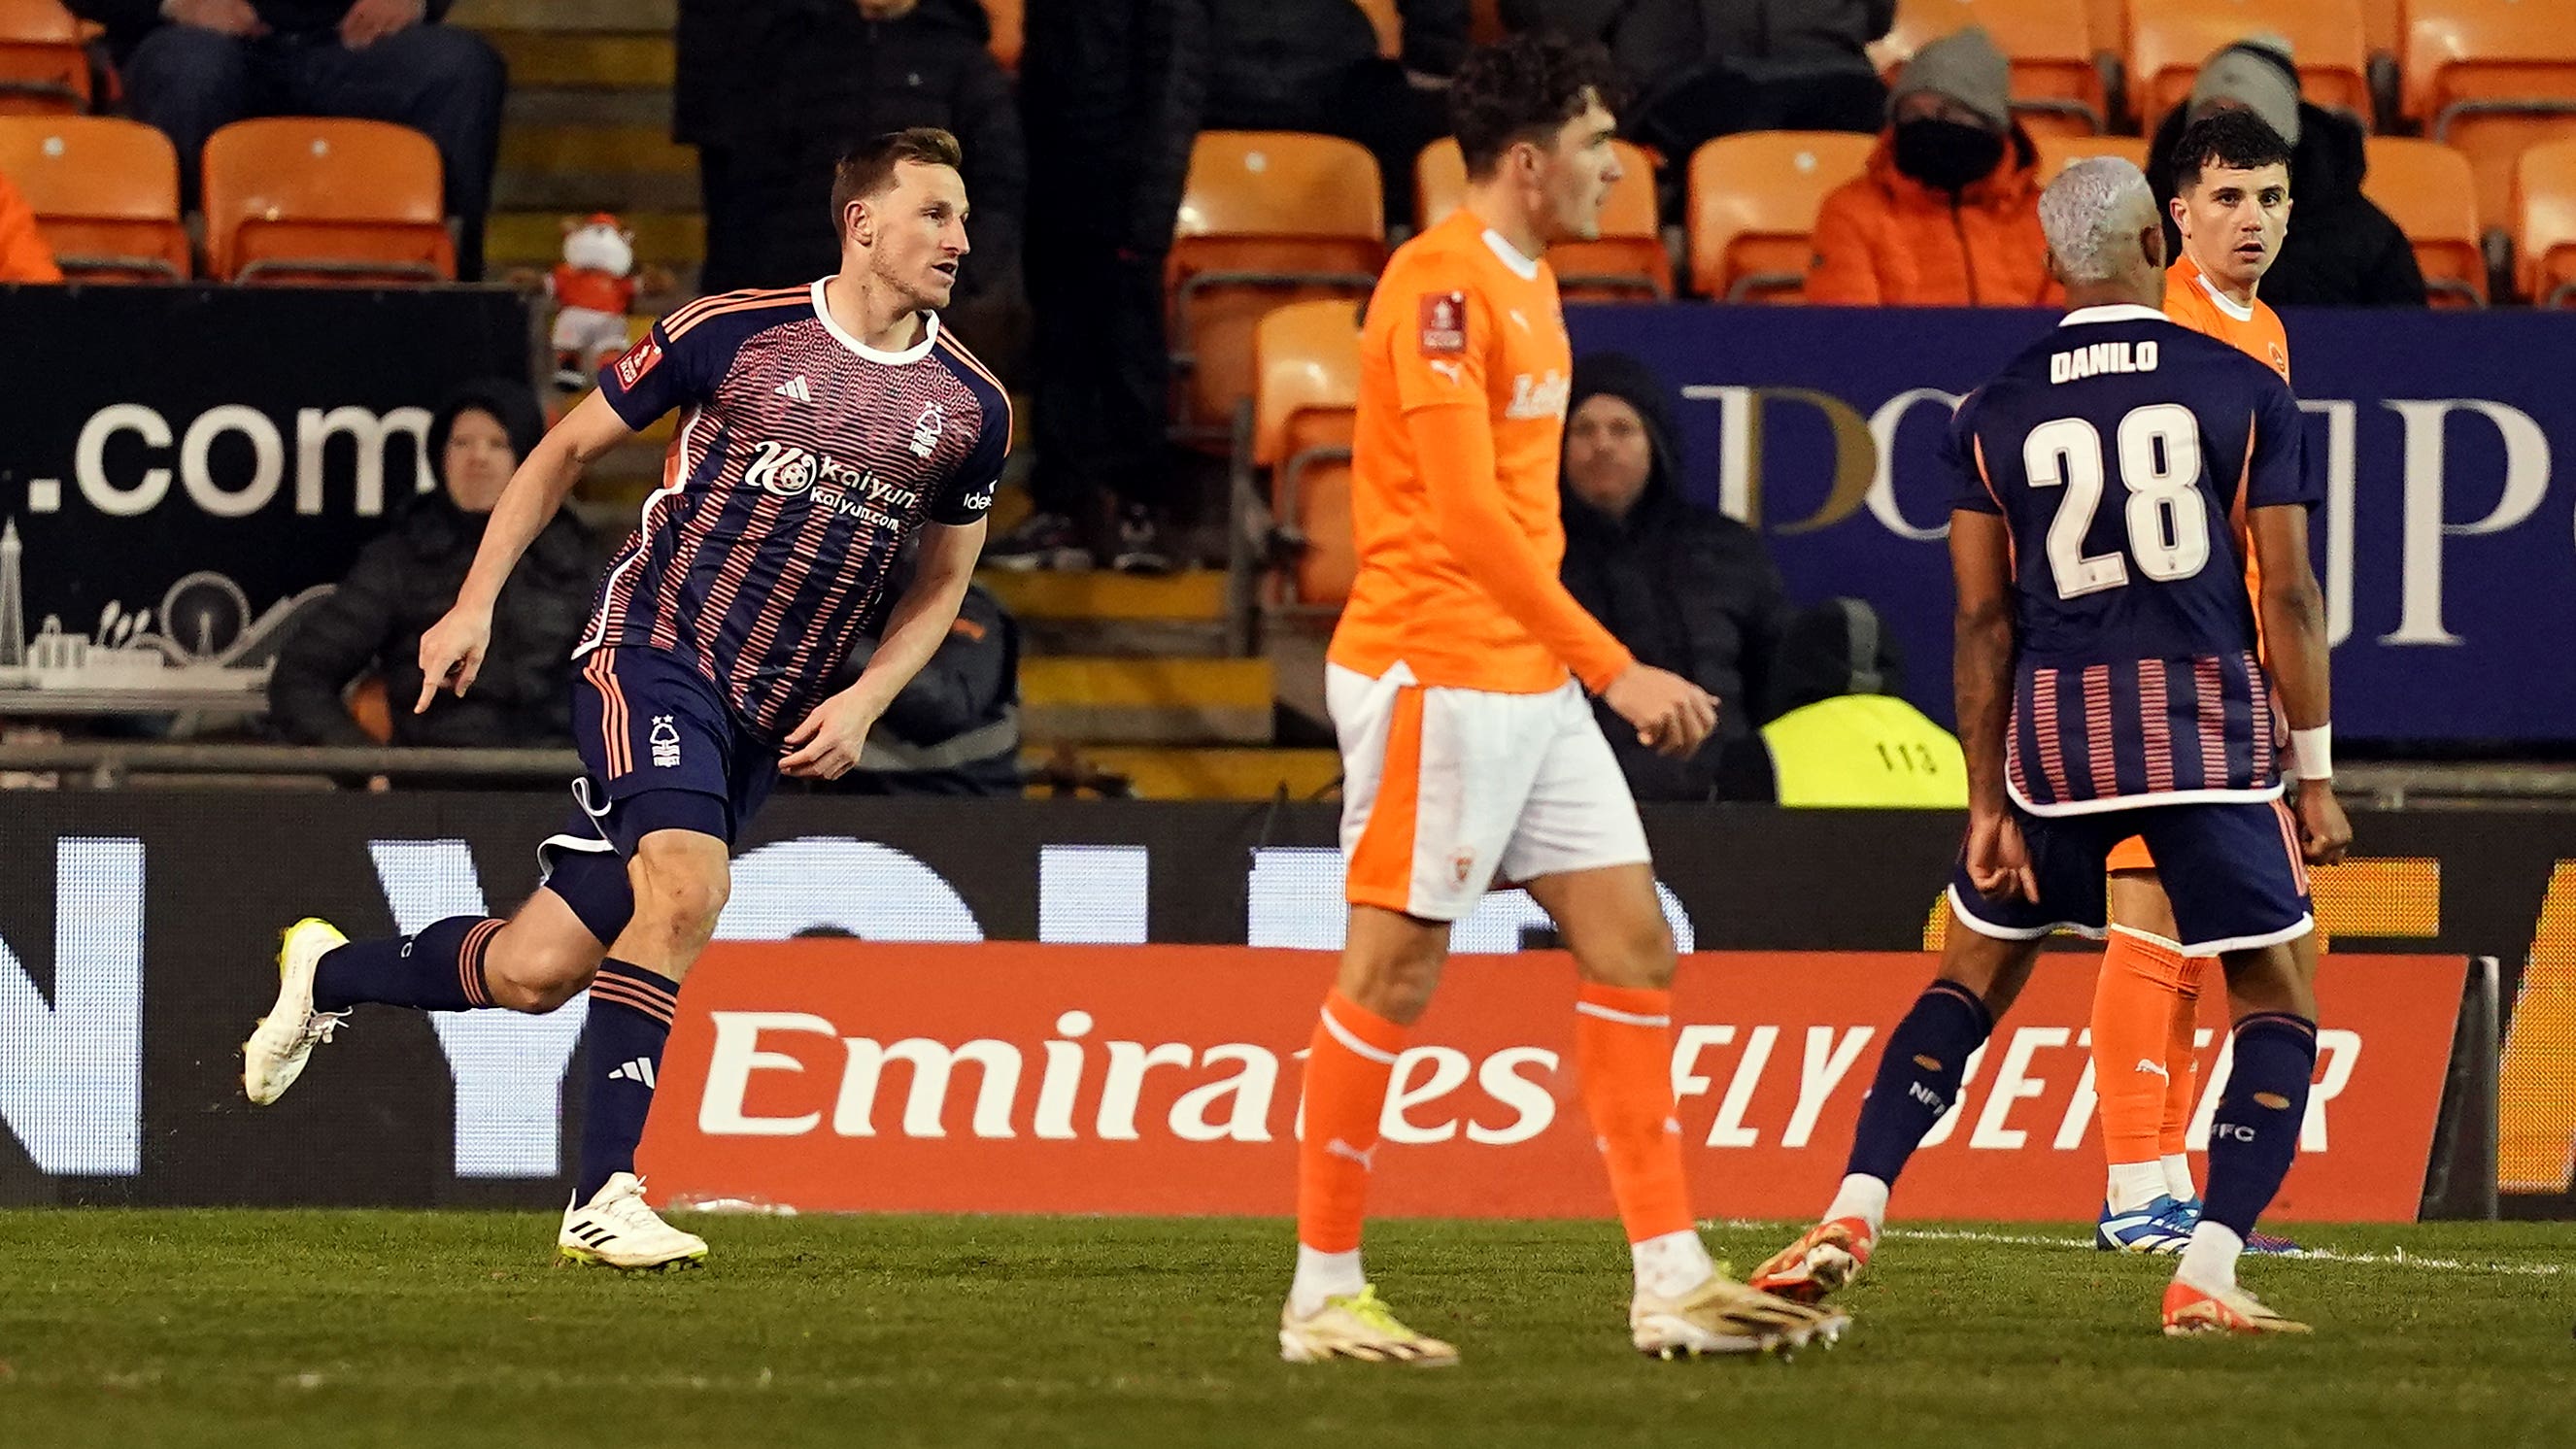 Chris Wood nets extra-time winner as Nottingham Forest edge past Blackpool